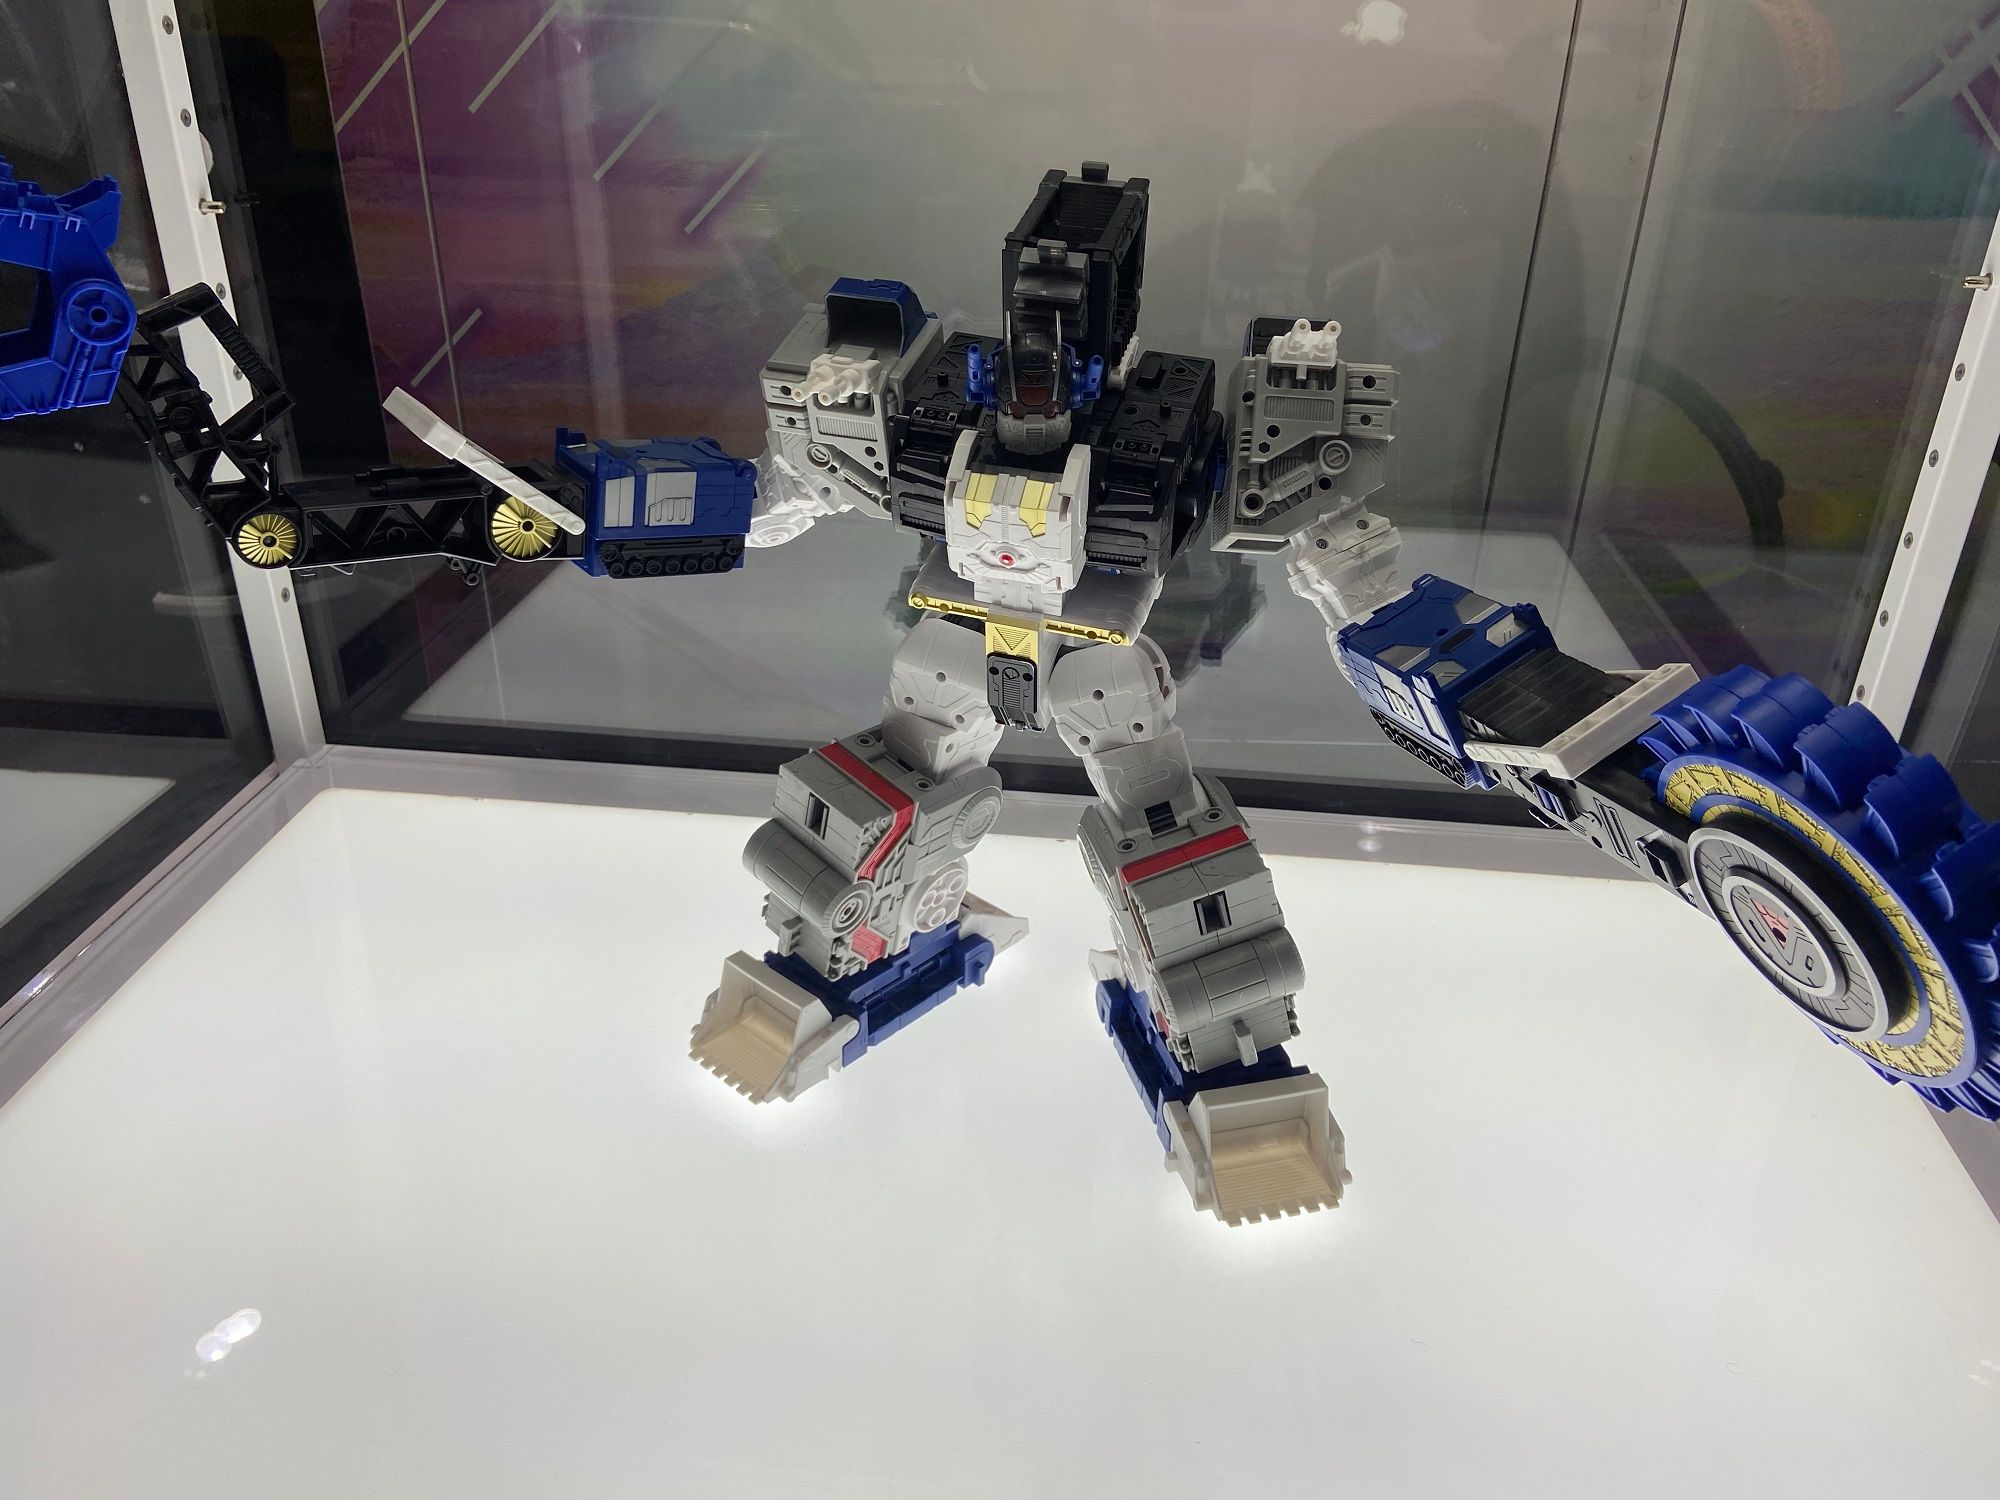 Large Transformer toy at Hasbro Booth SDCC 2022